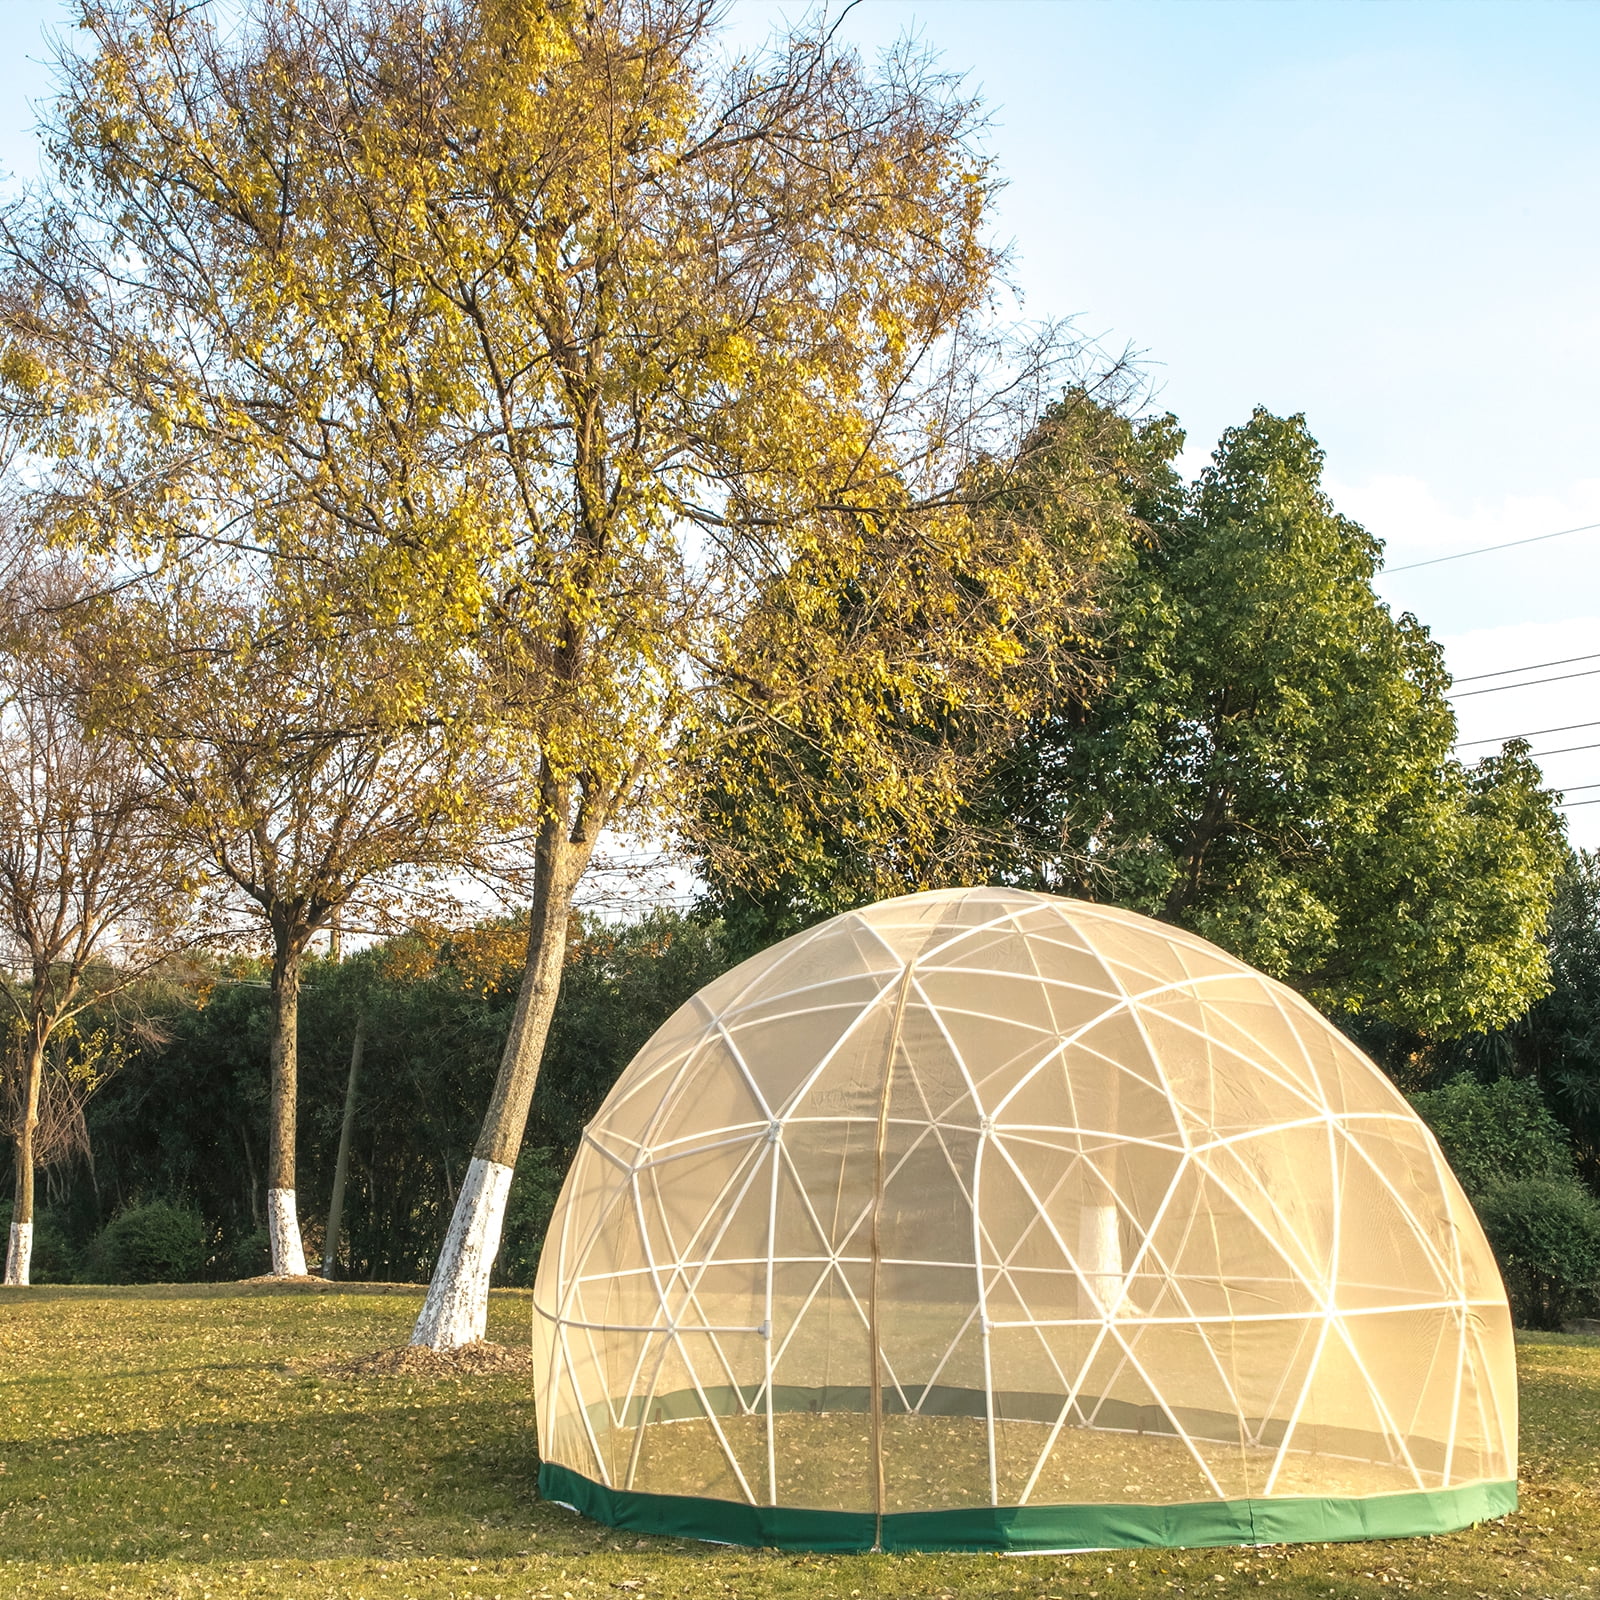 Patiolife Garden Dome 9.5ft Party Bubble Tent with Door and Windows for Sunbubble Geodesic Dome with PVC Cover Backyard Outdoor Winter